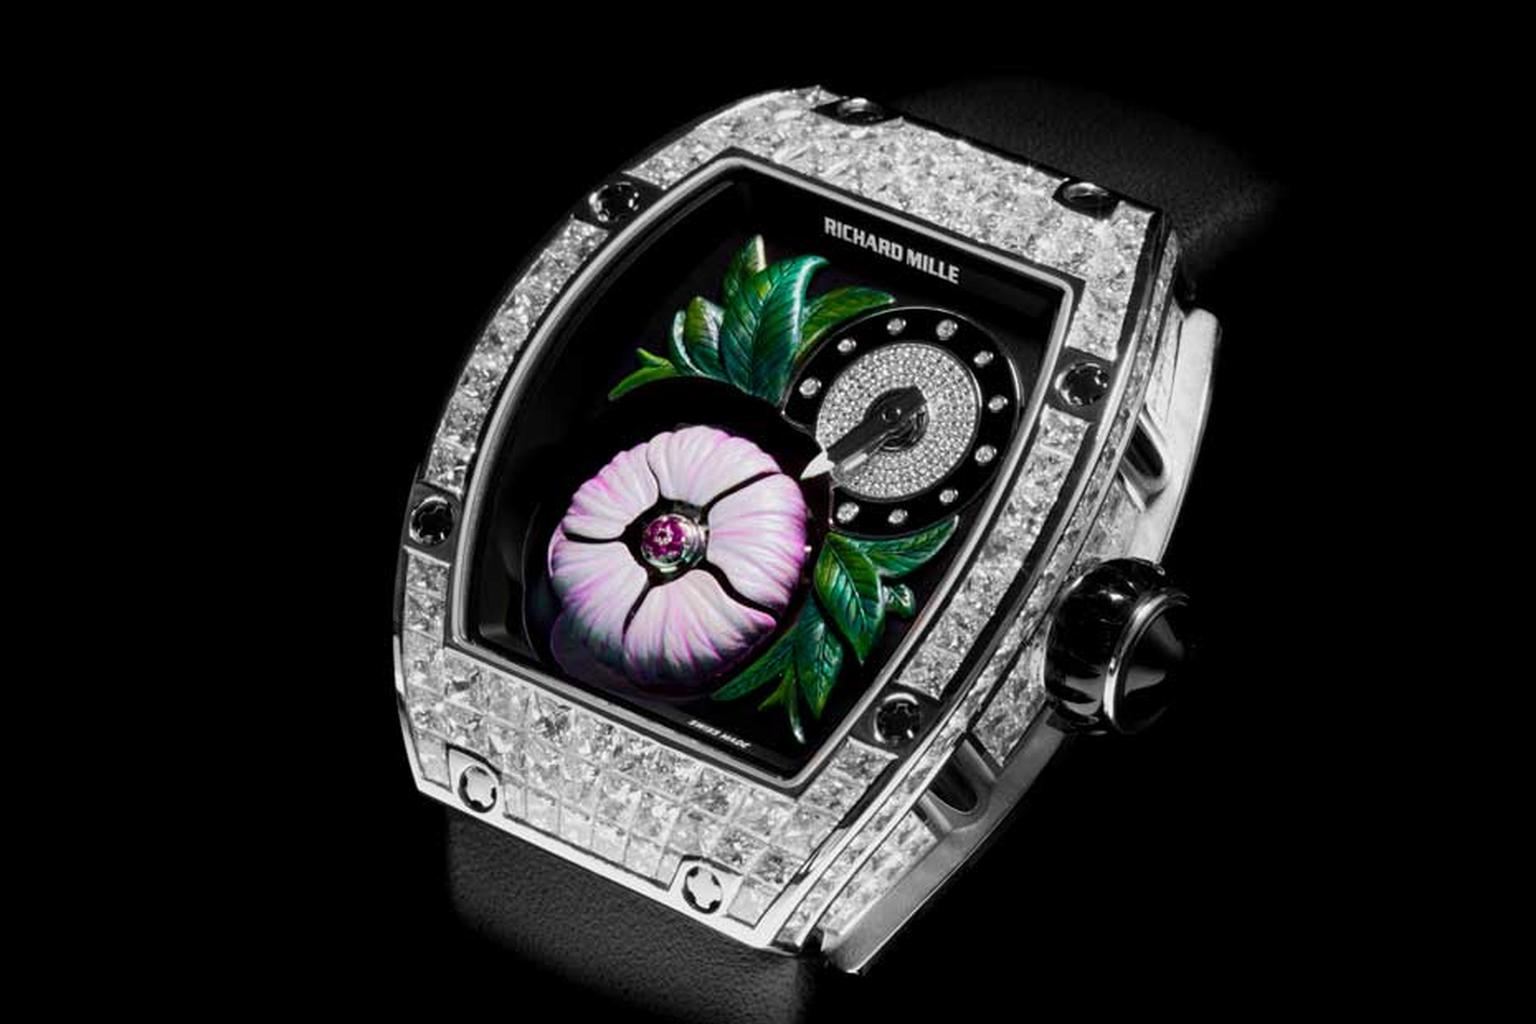 The new ladies' RM 19-02 Tourbillon Fleur watch from Richard Mille is a limited edition. With just 30 pieces being produced worldwide, it comes with a price tag of CHF 924,000.